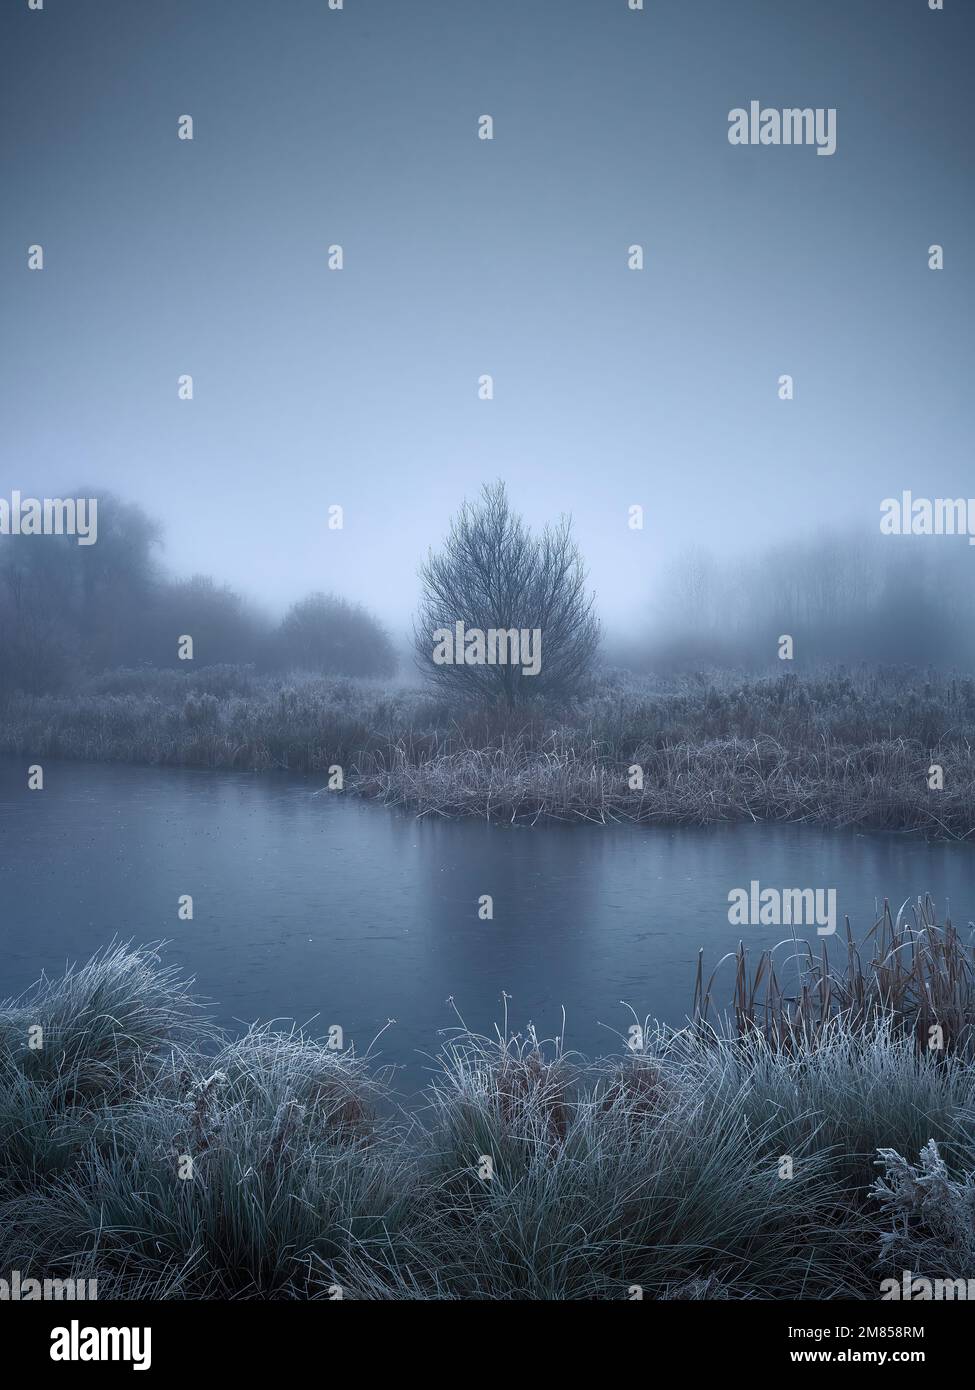 Winter’s arrival in the UK, with the cold snap and mist turning the familiar lakeside woodland landscape into a dream-like, liminal space. Stock Photo